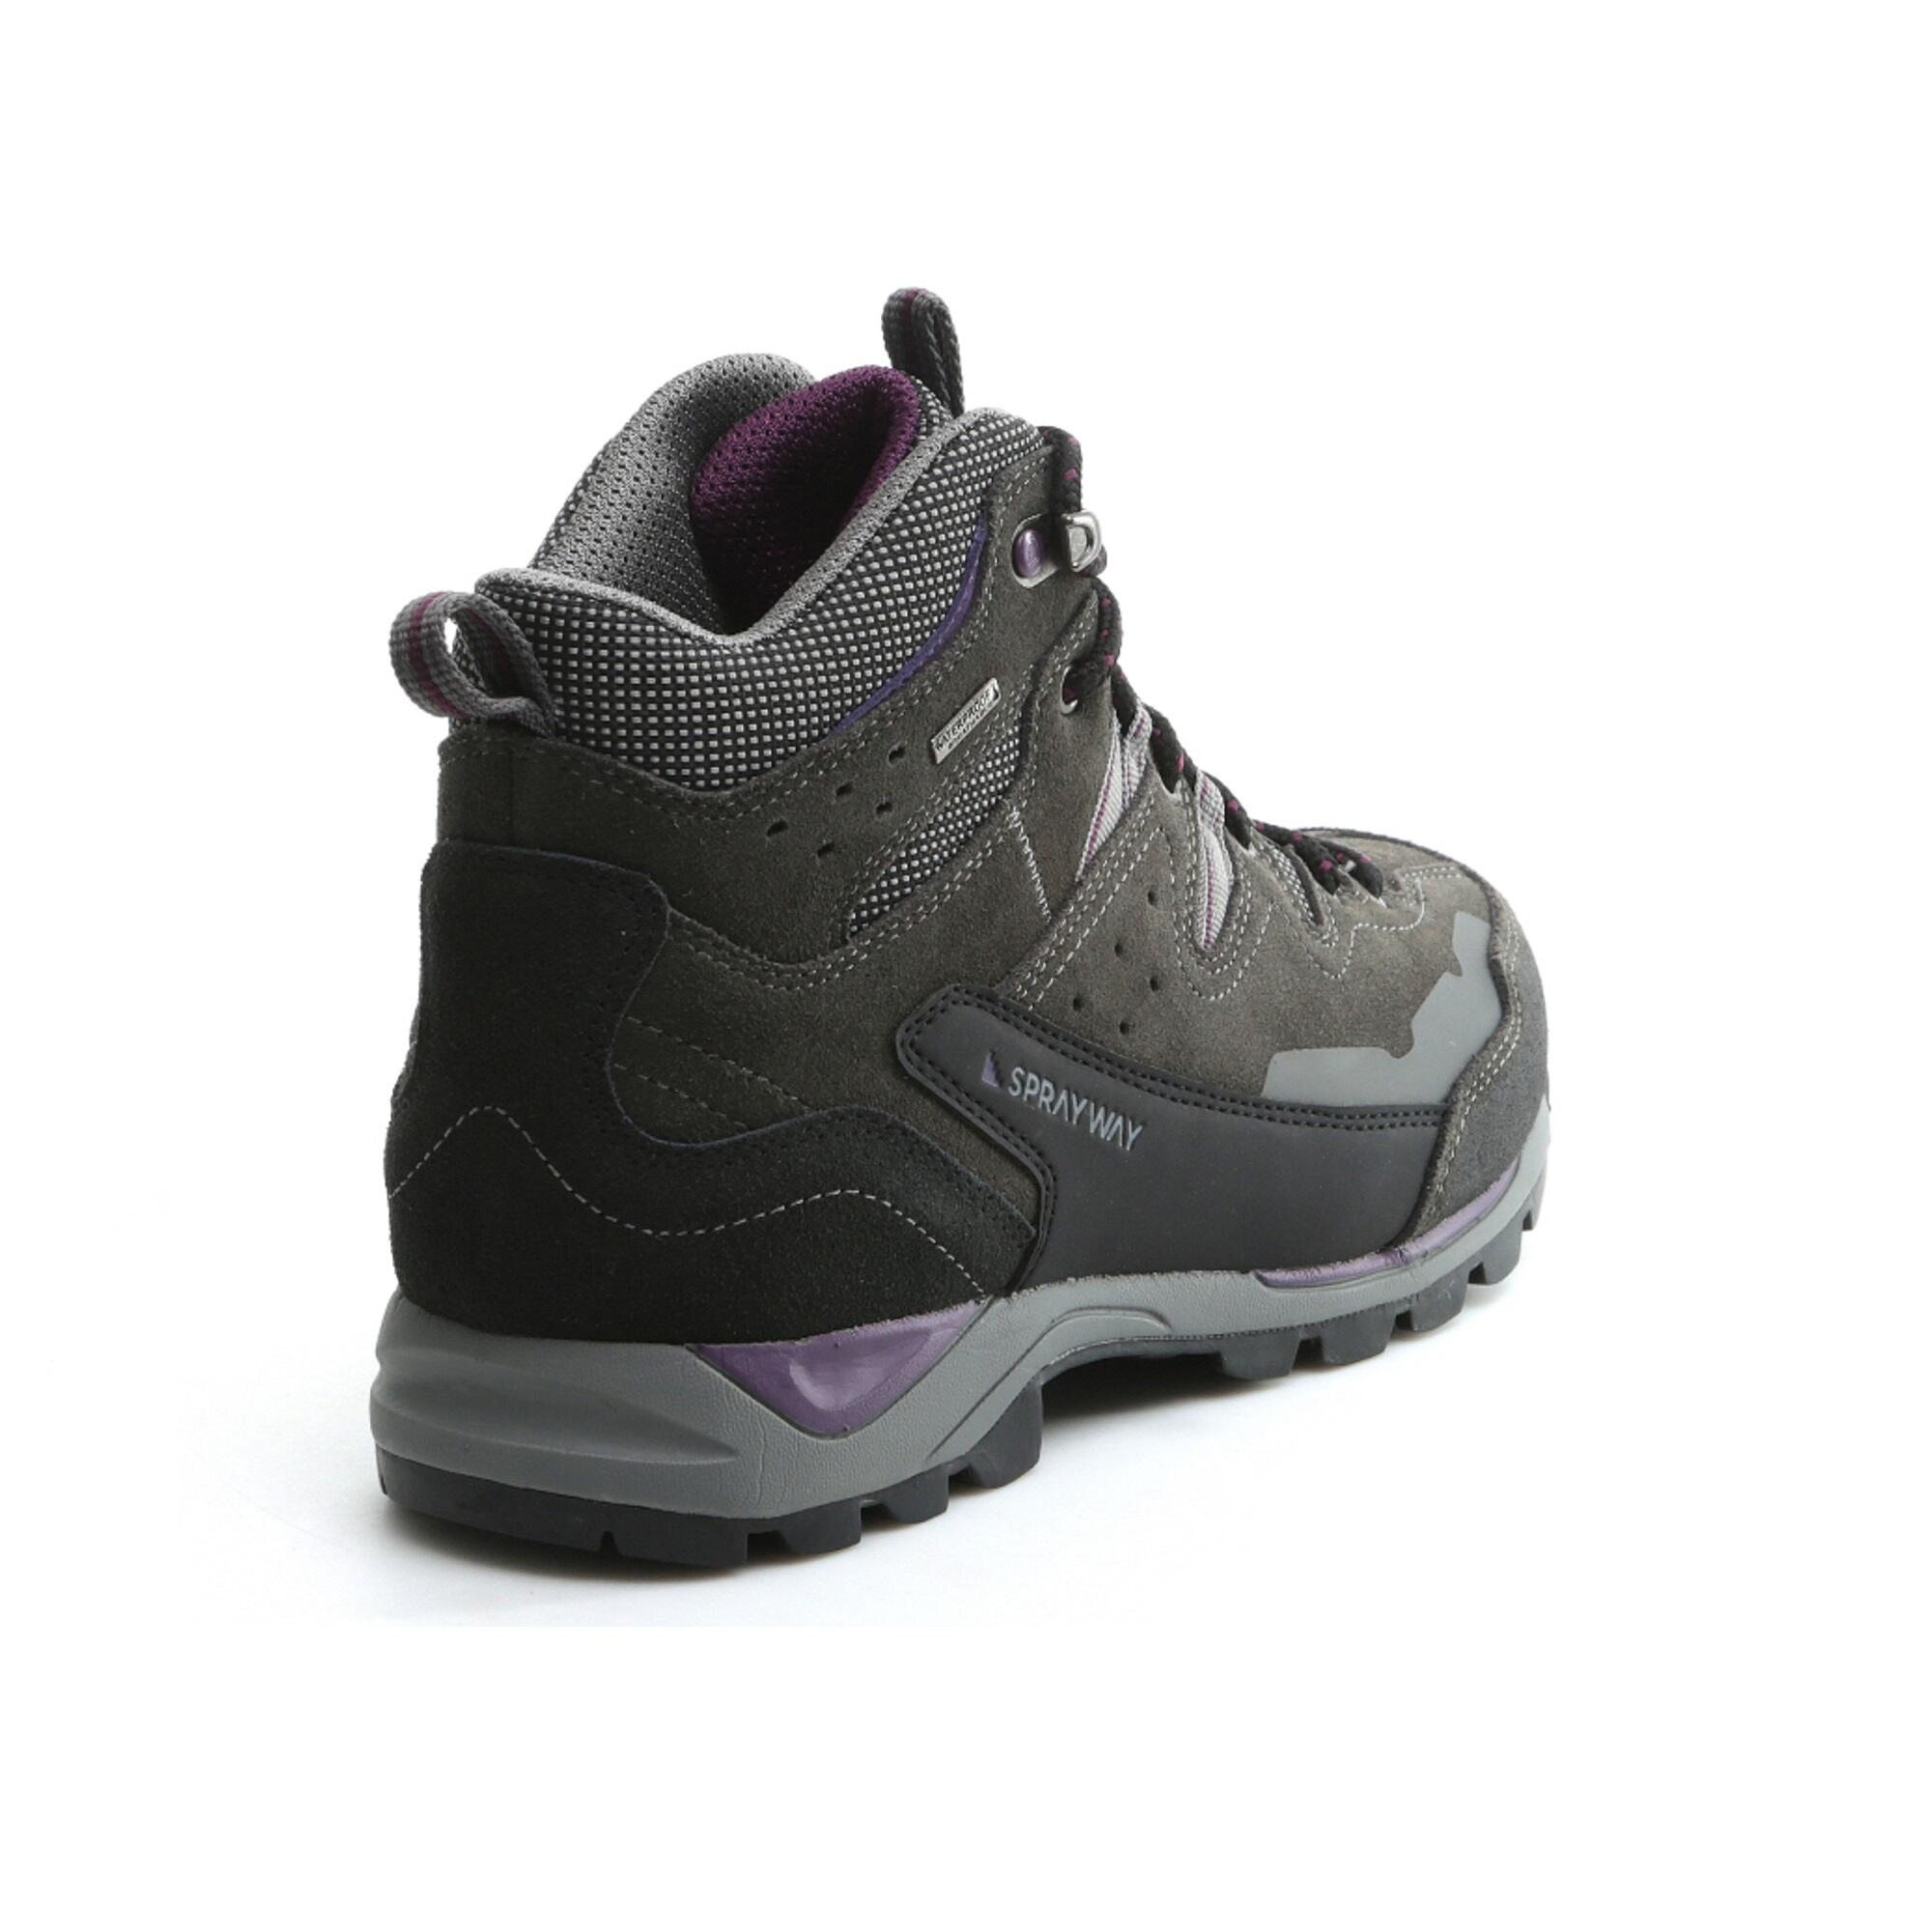 Womens waterproof leather boots - Sprayway Oxna Mid Charcoal/Purple 5/5